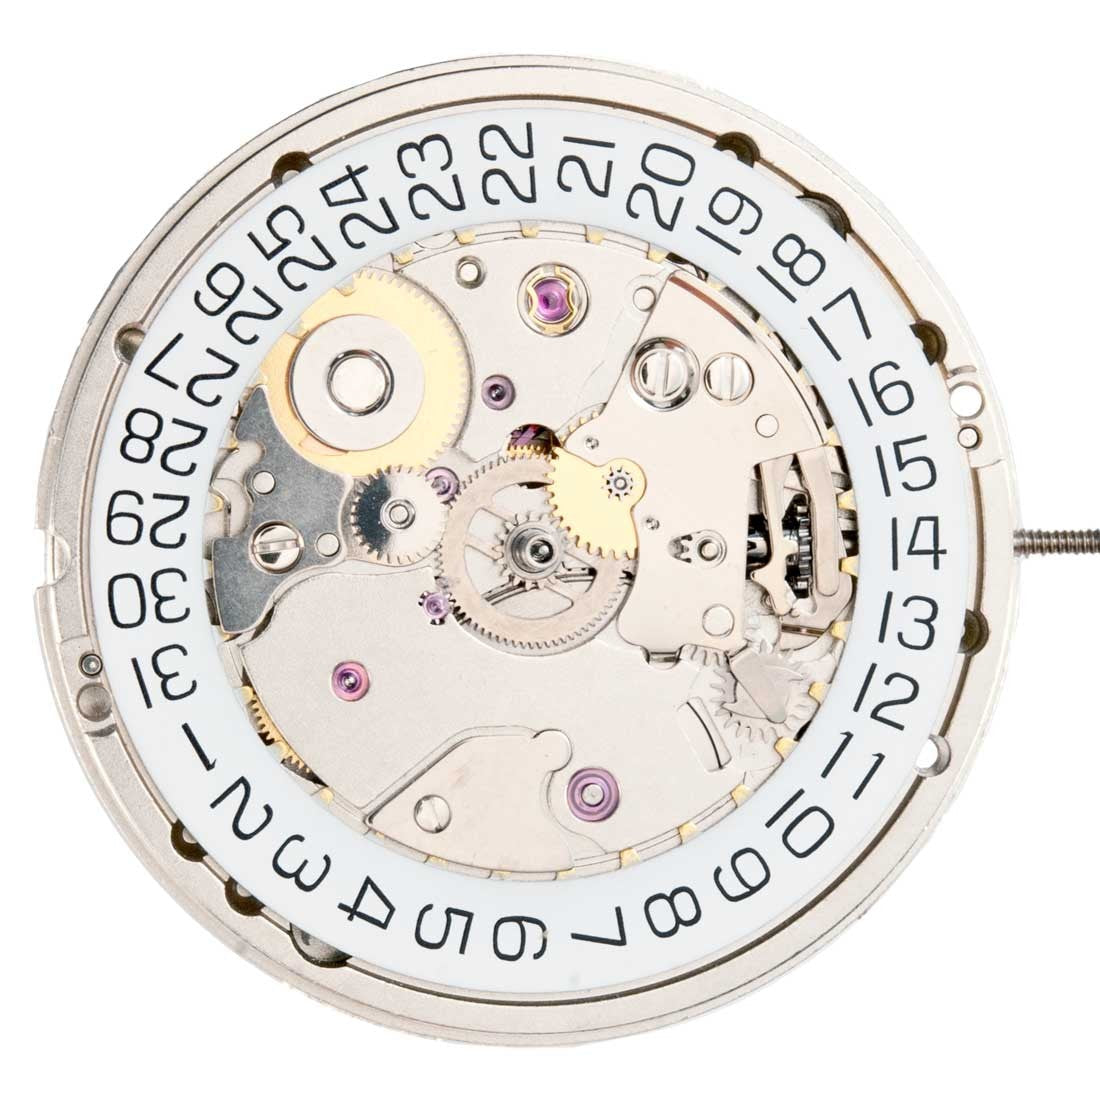 Sellita SW300-1 3 Hands Swiss Made Automatic Movement Ht. 5.25MM